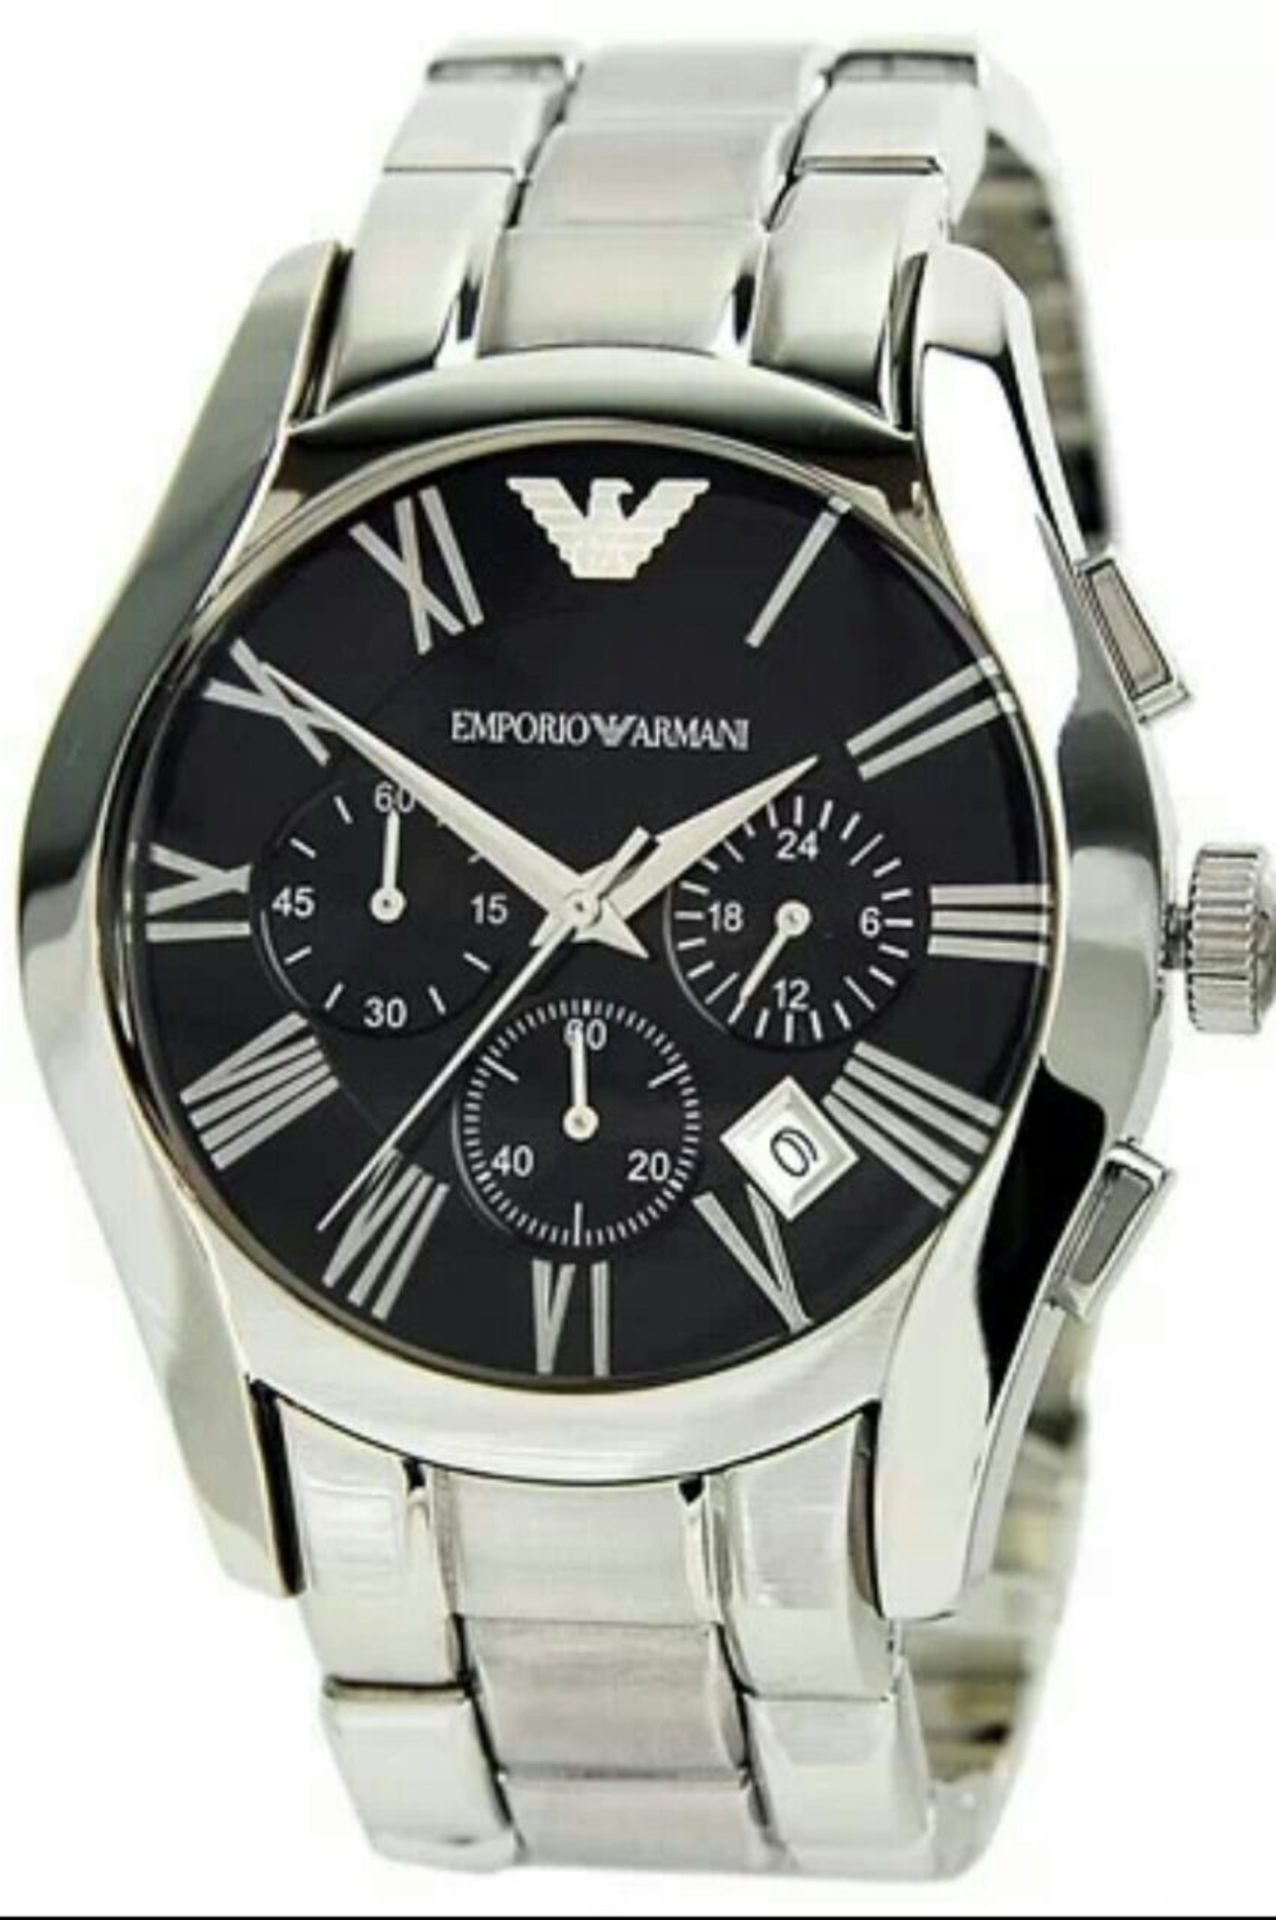 BRAND NEW EMPORIO ARMANI AR0673, COMPLETE WITH ORIGINAL PACKAGING MANUAL AND CERTIFICATE